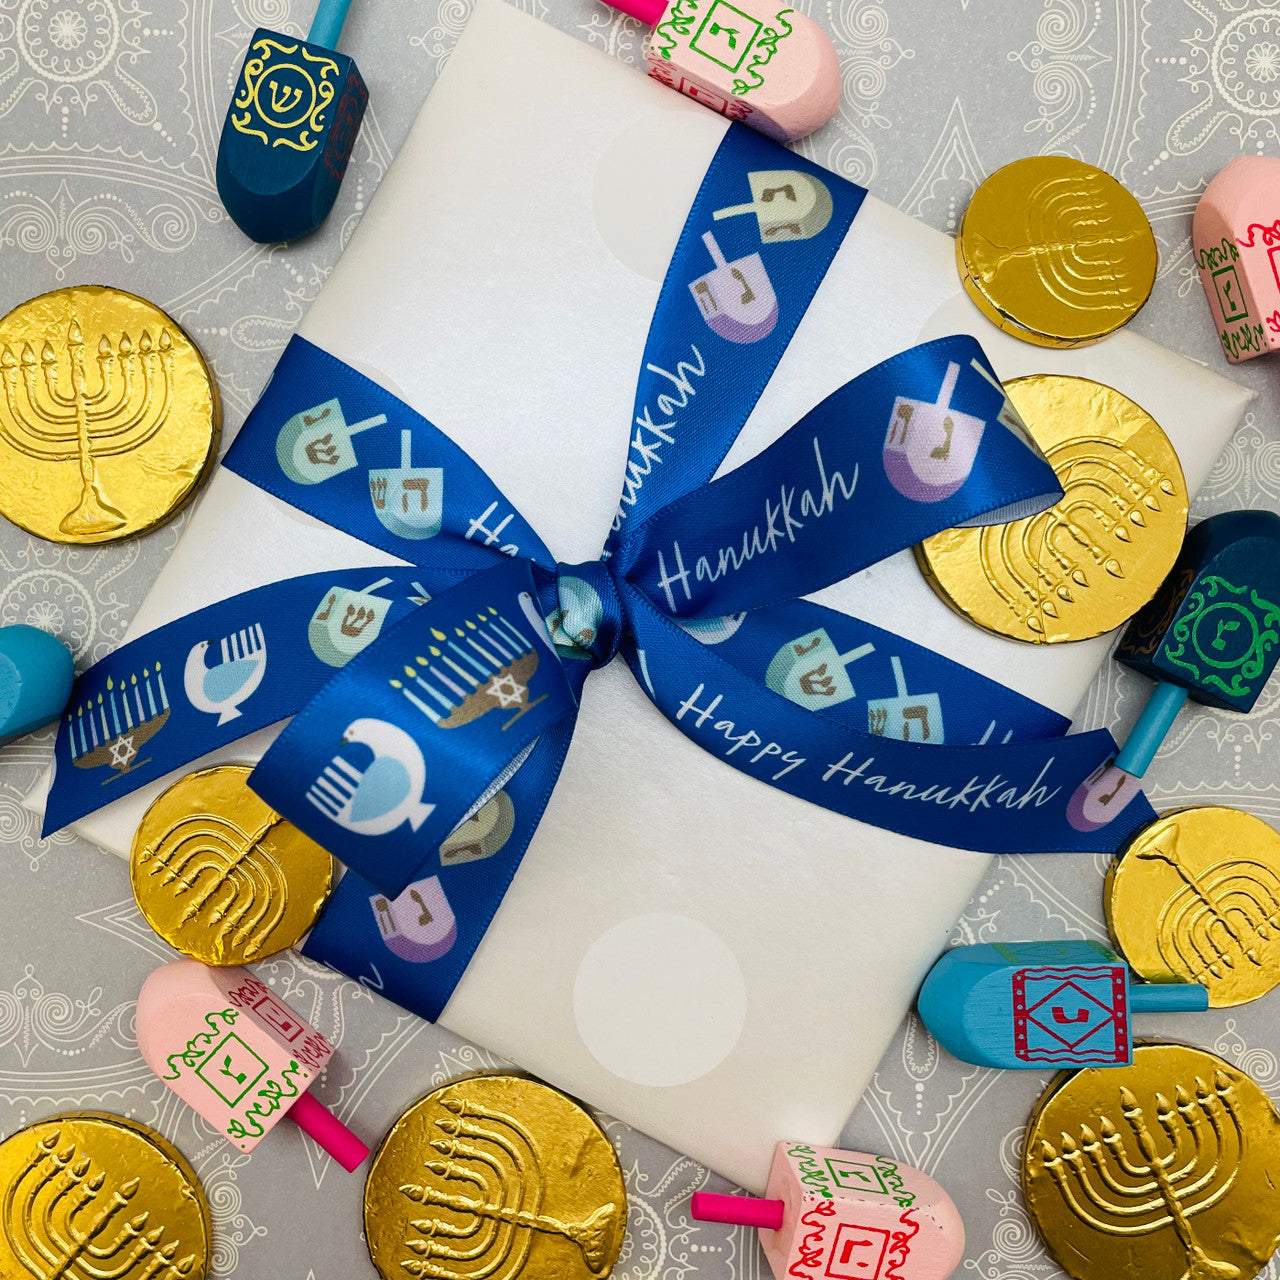 Tie our Happy Hanukkah ribbon on all our gifts for the Hanukkah gifts on your list!